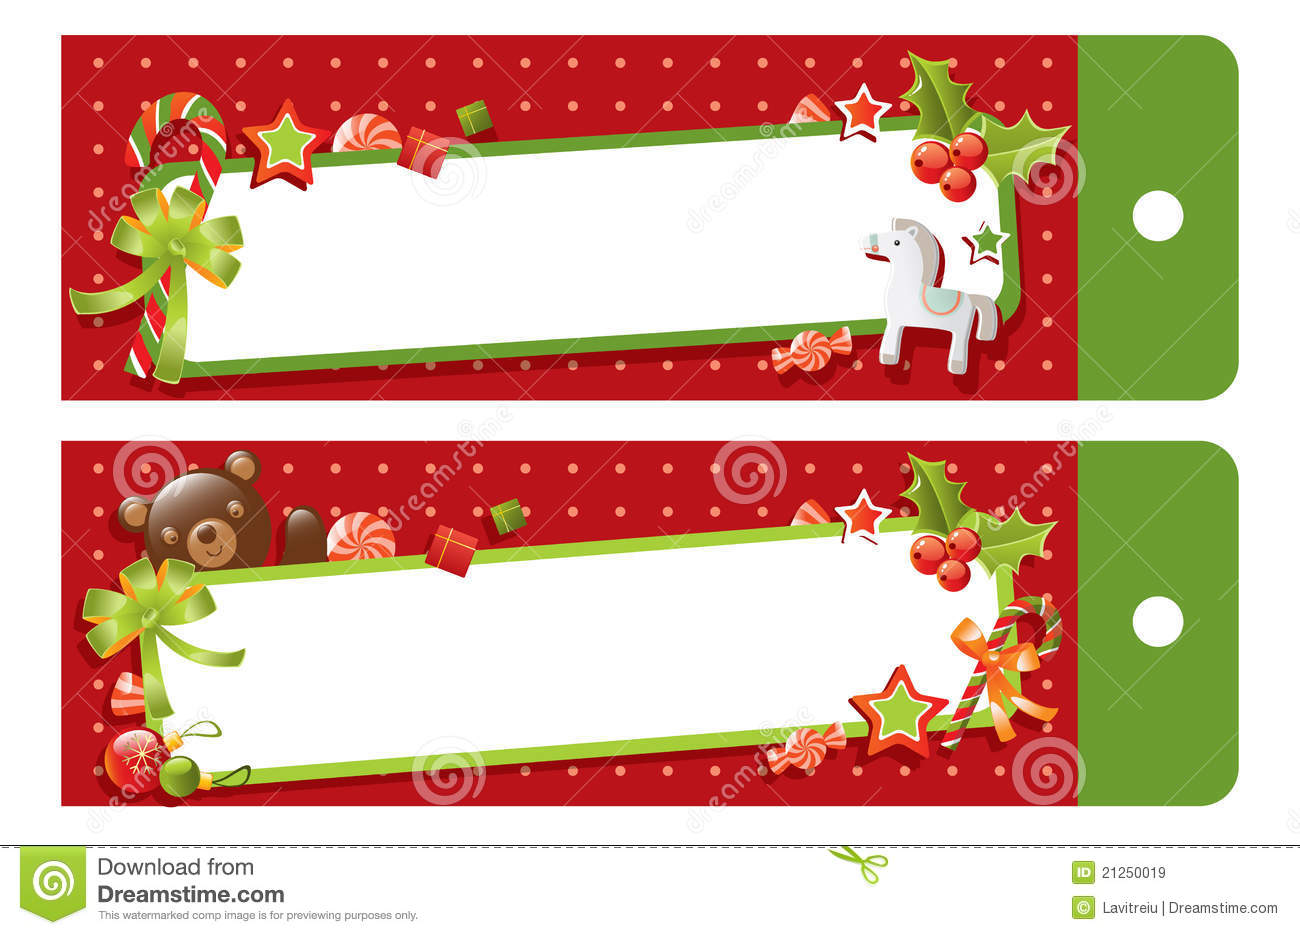 Christmas Gift Tag Royalty Free Stock Images   Image  21250019